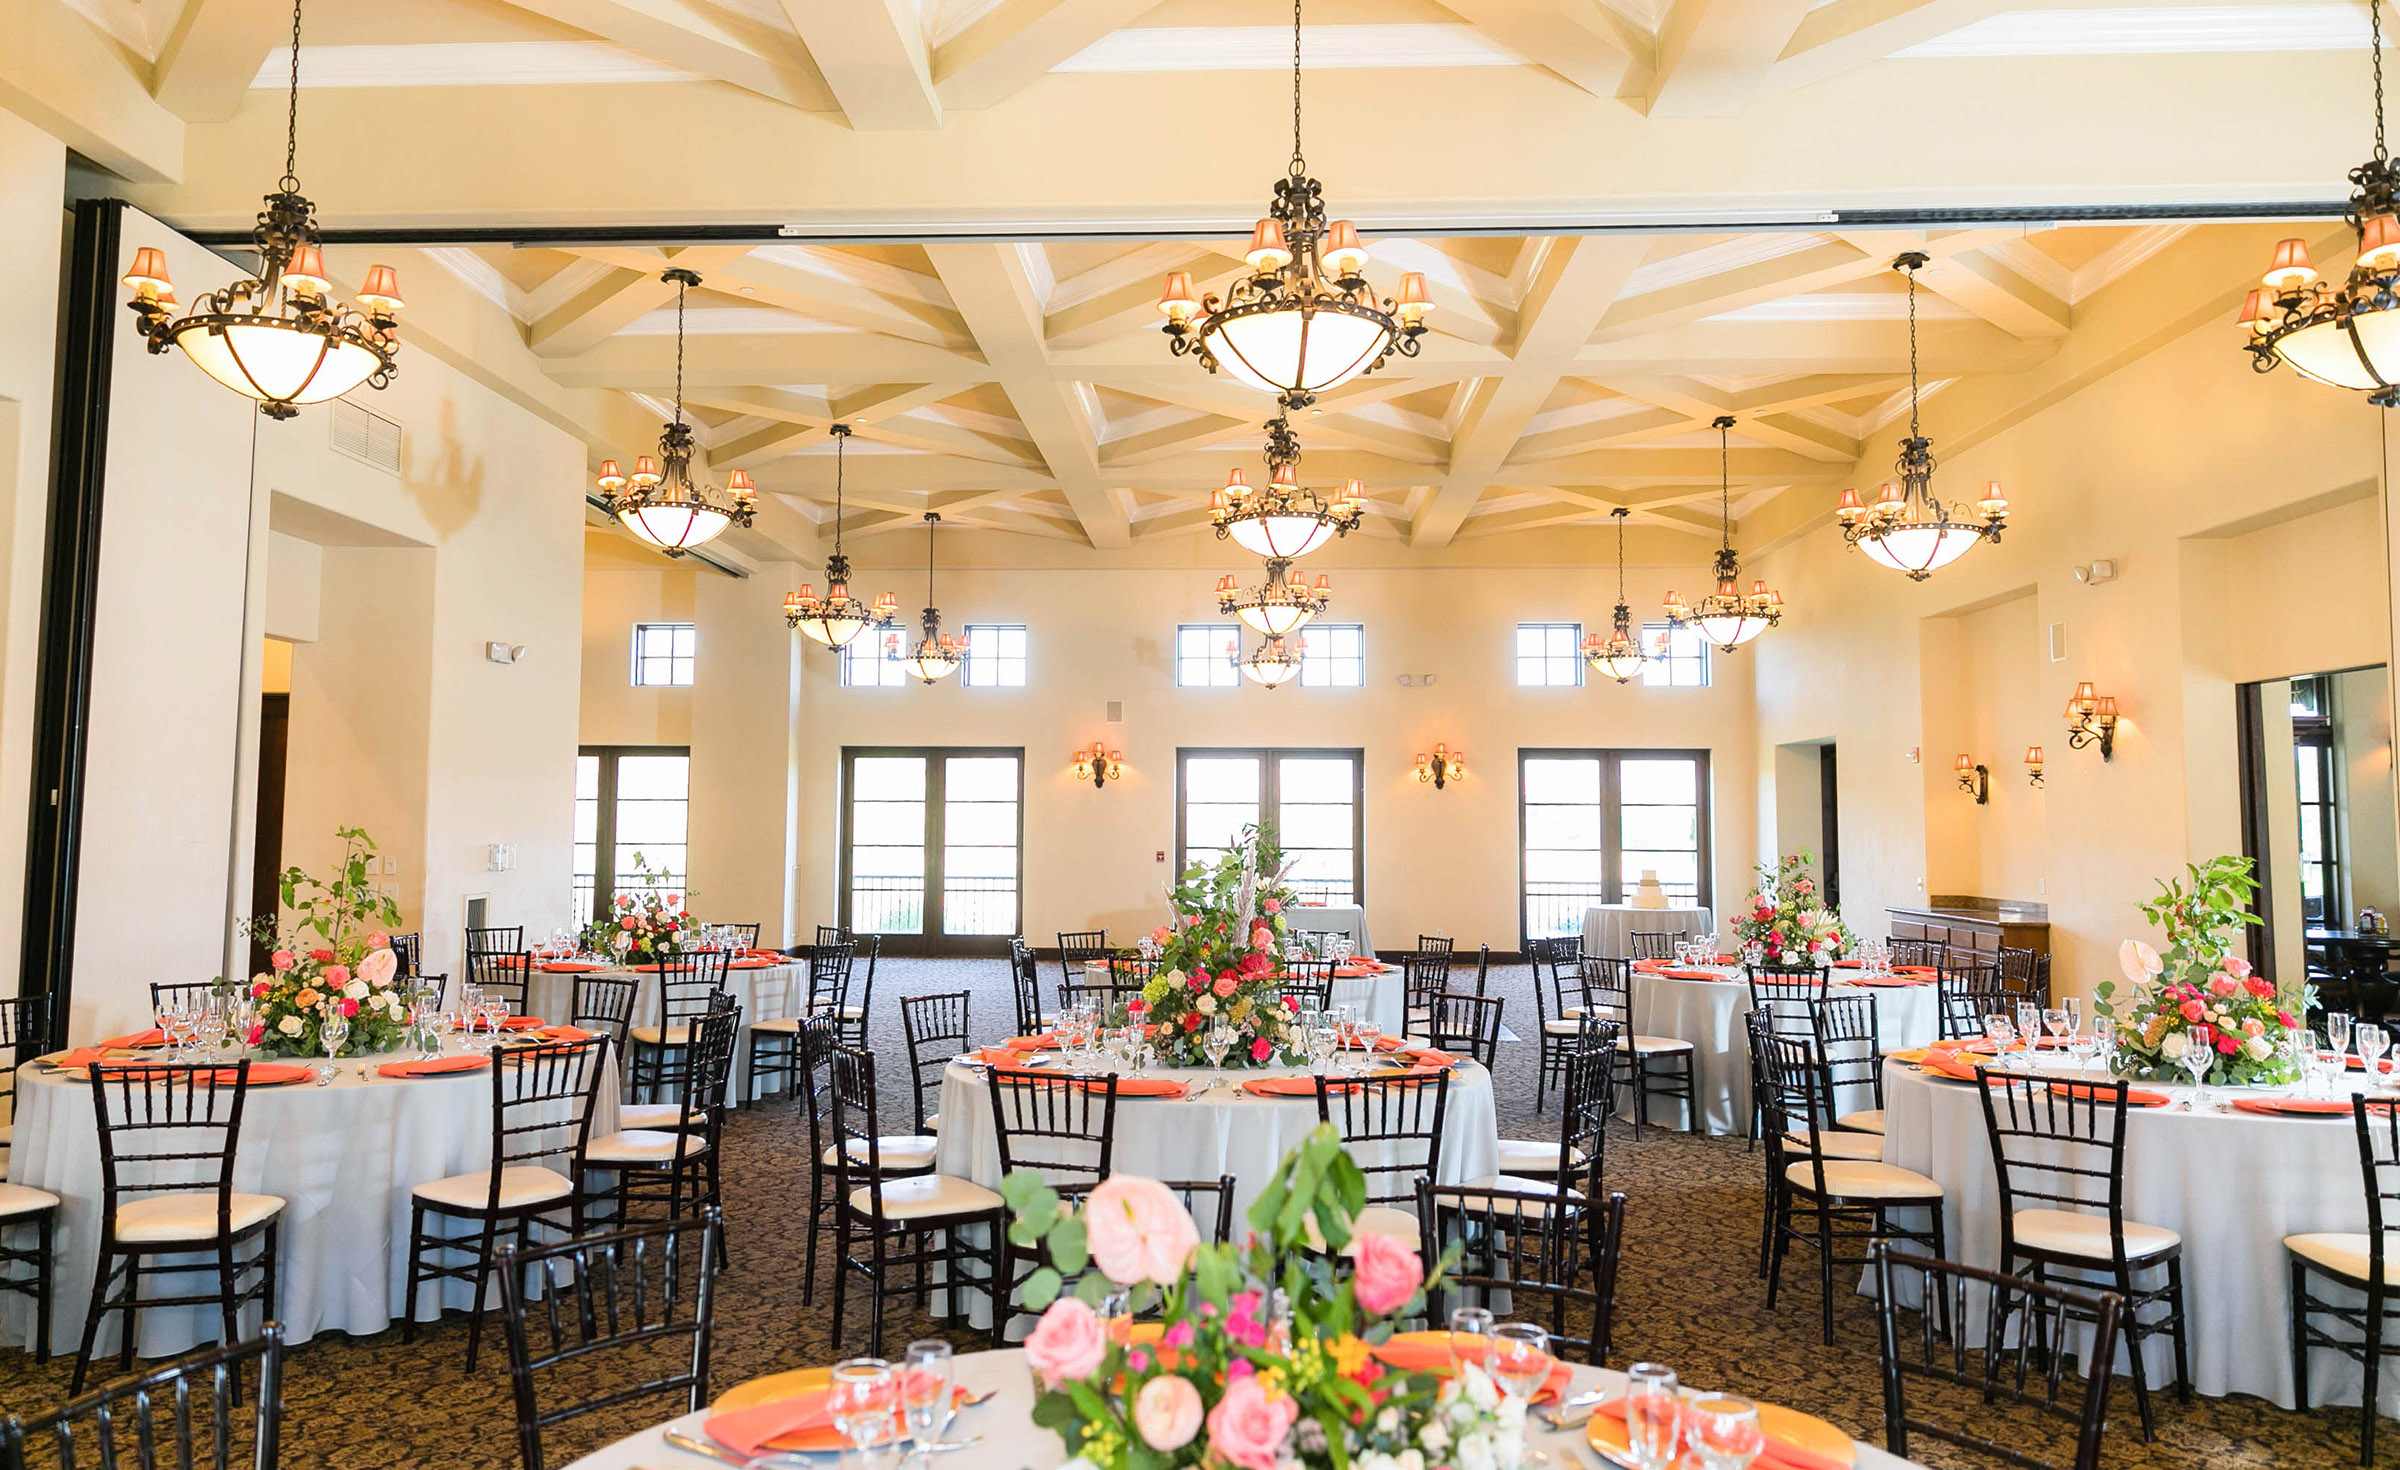  Wedding Venues Fallbrook Ca of the decade Check it out now 